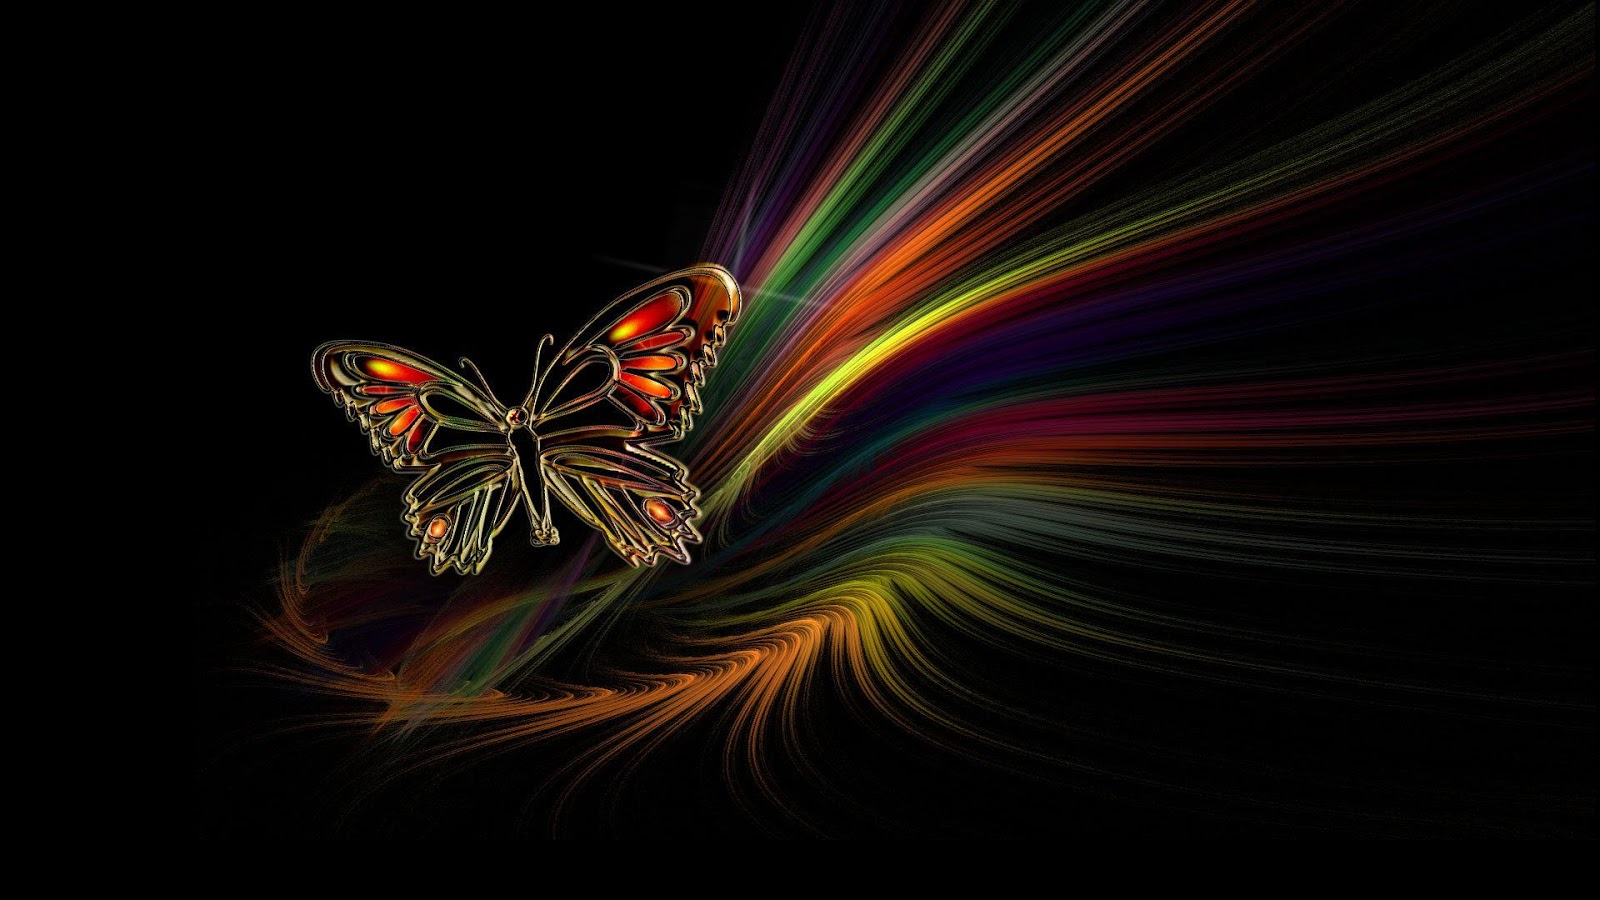 Beautiful Butterfly Abstract HD Wallpaper For Desktop Background